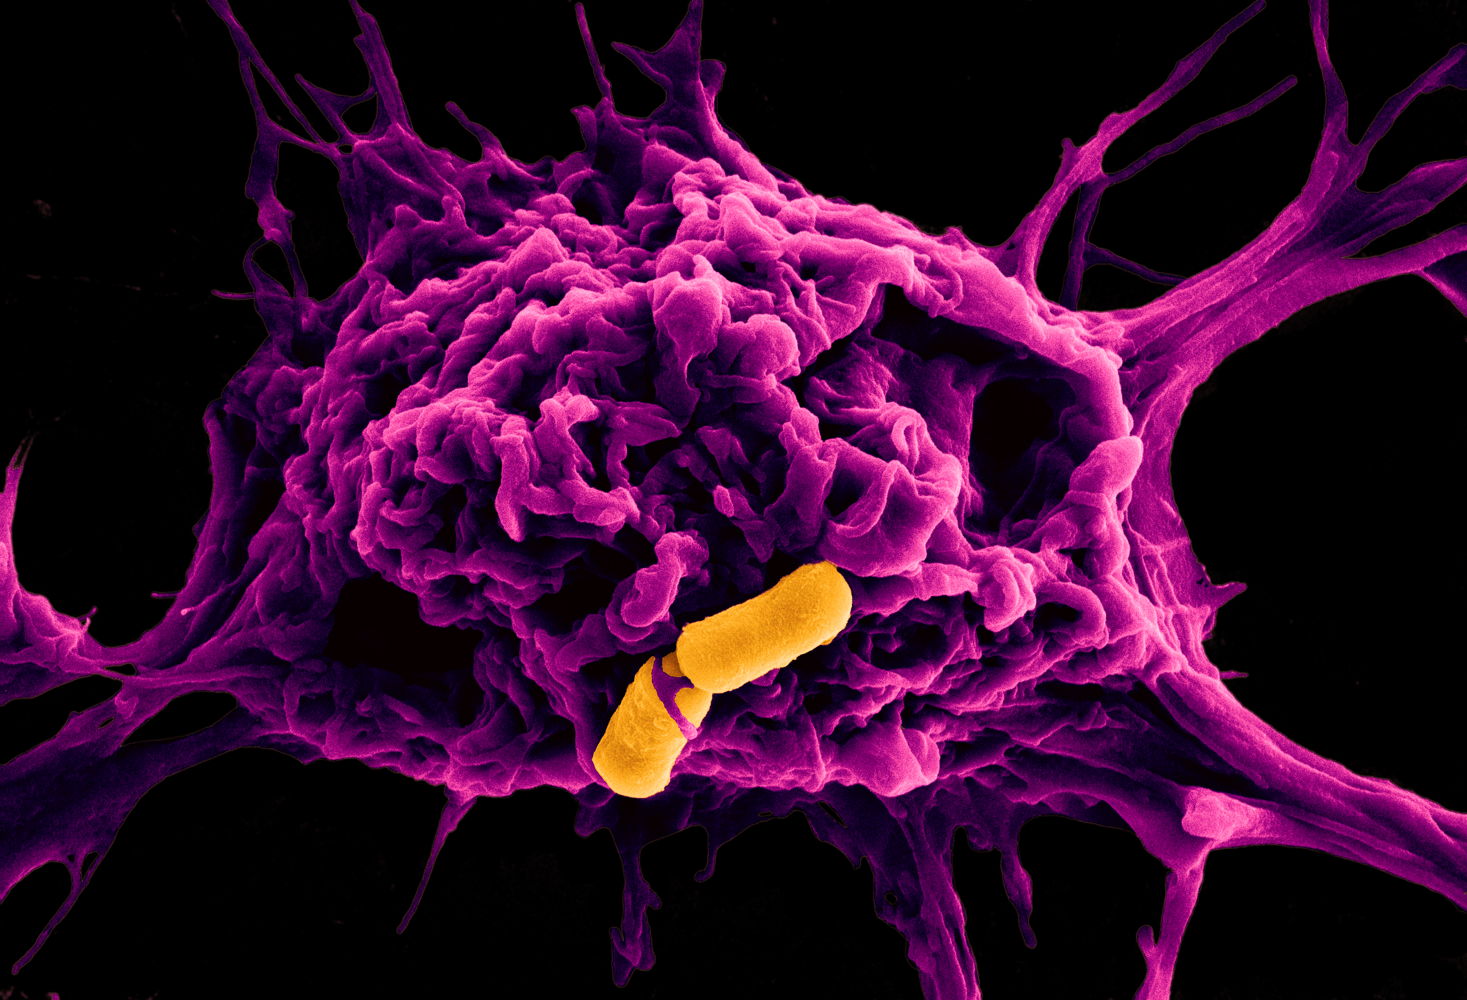 “A fight between an immune cell (purple) and two rod-shaped stomach bugs (yellow)”. Credit: ANU